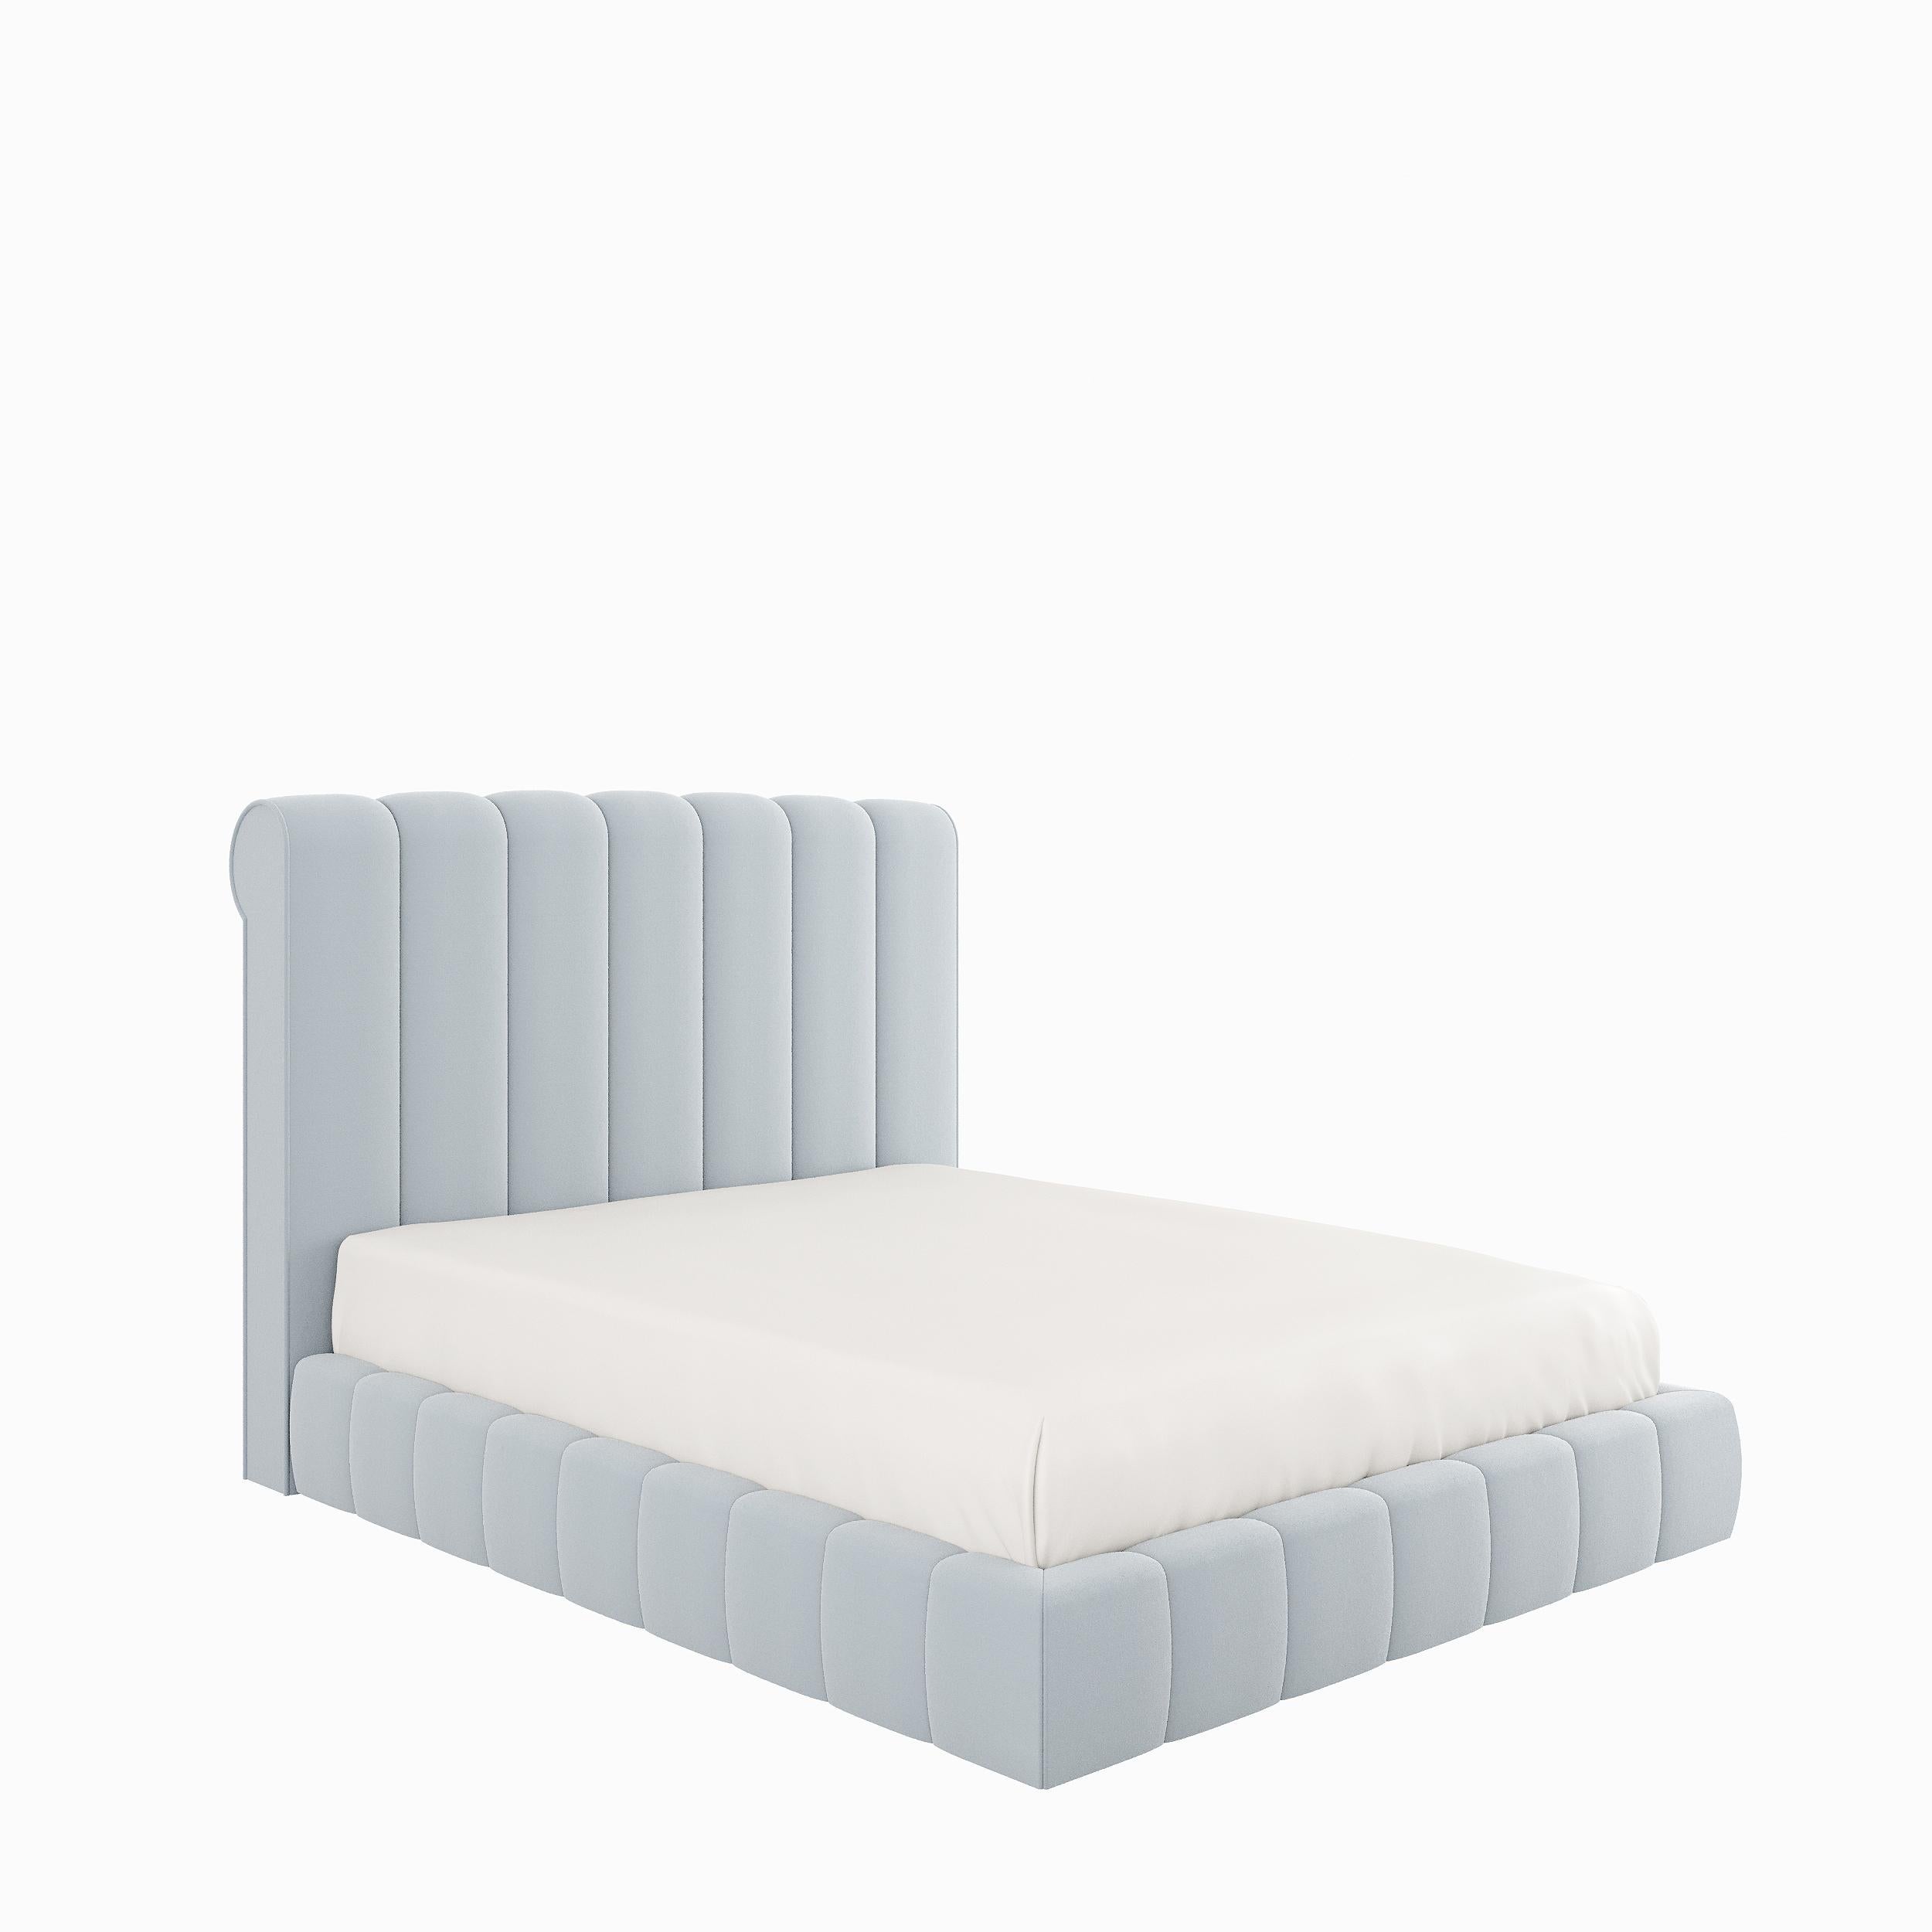 Modern BRISA bed with upholstered headboard and base For Sale